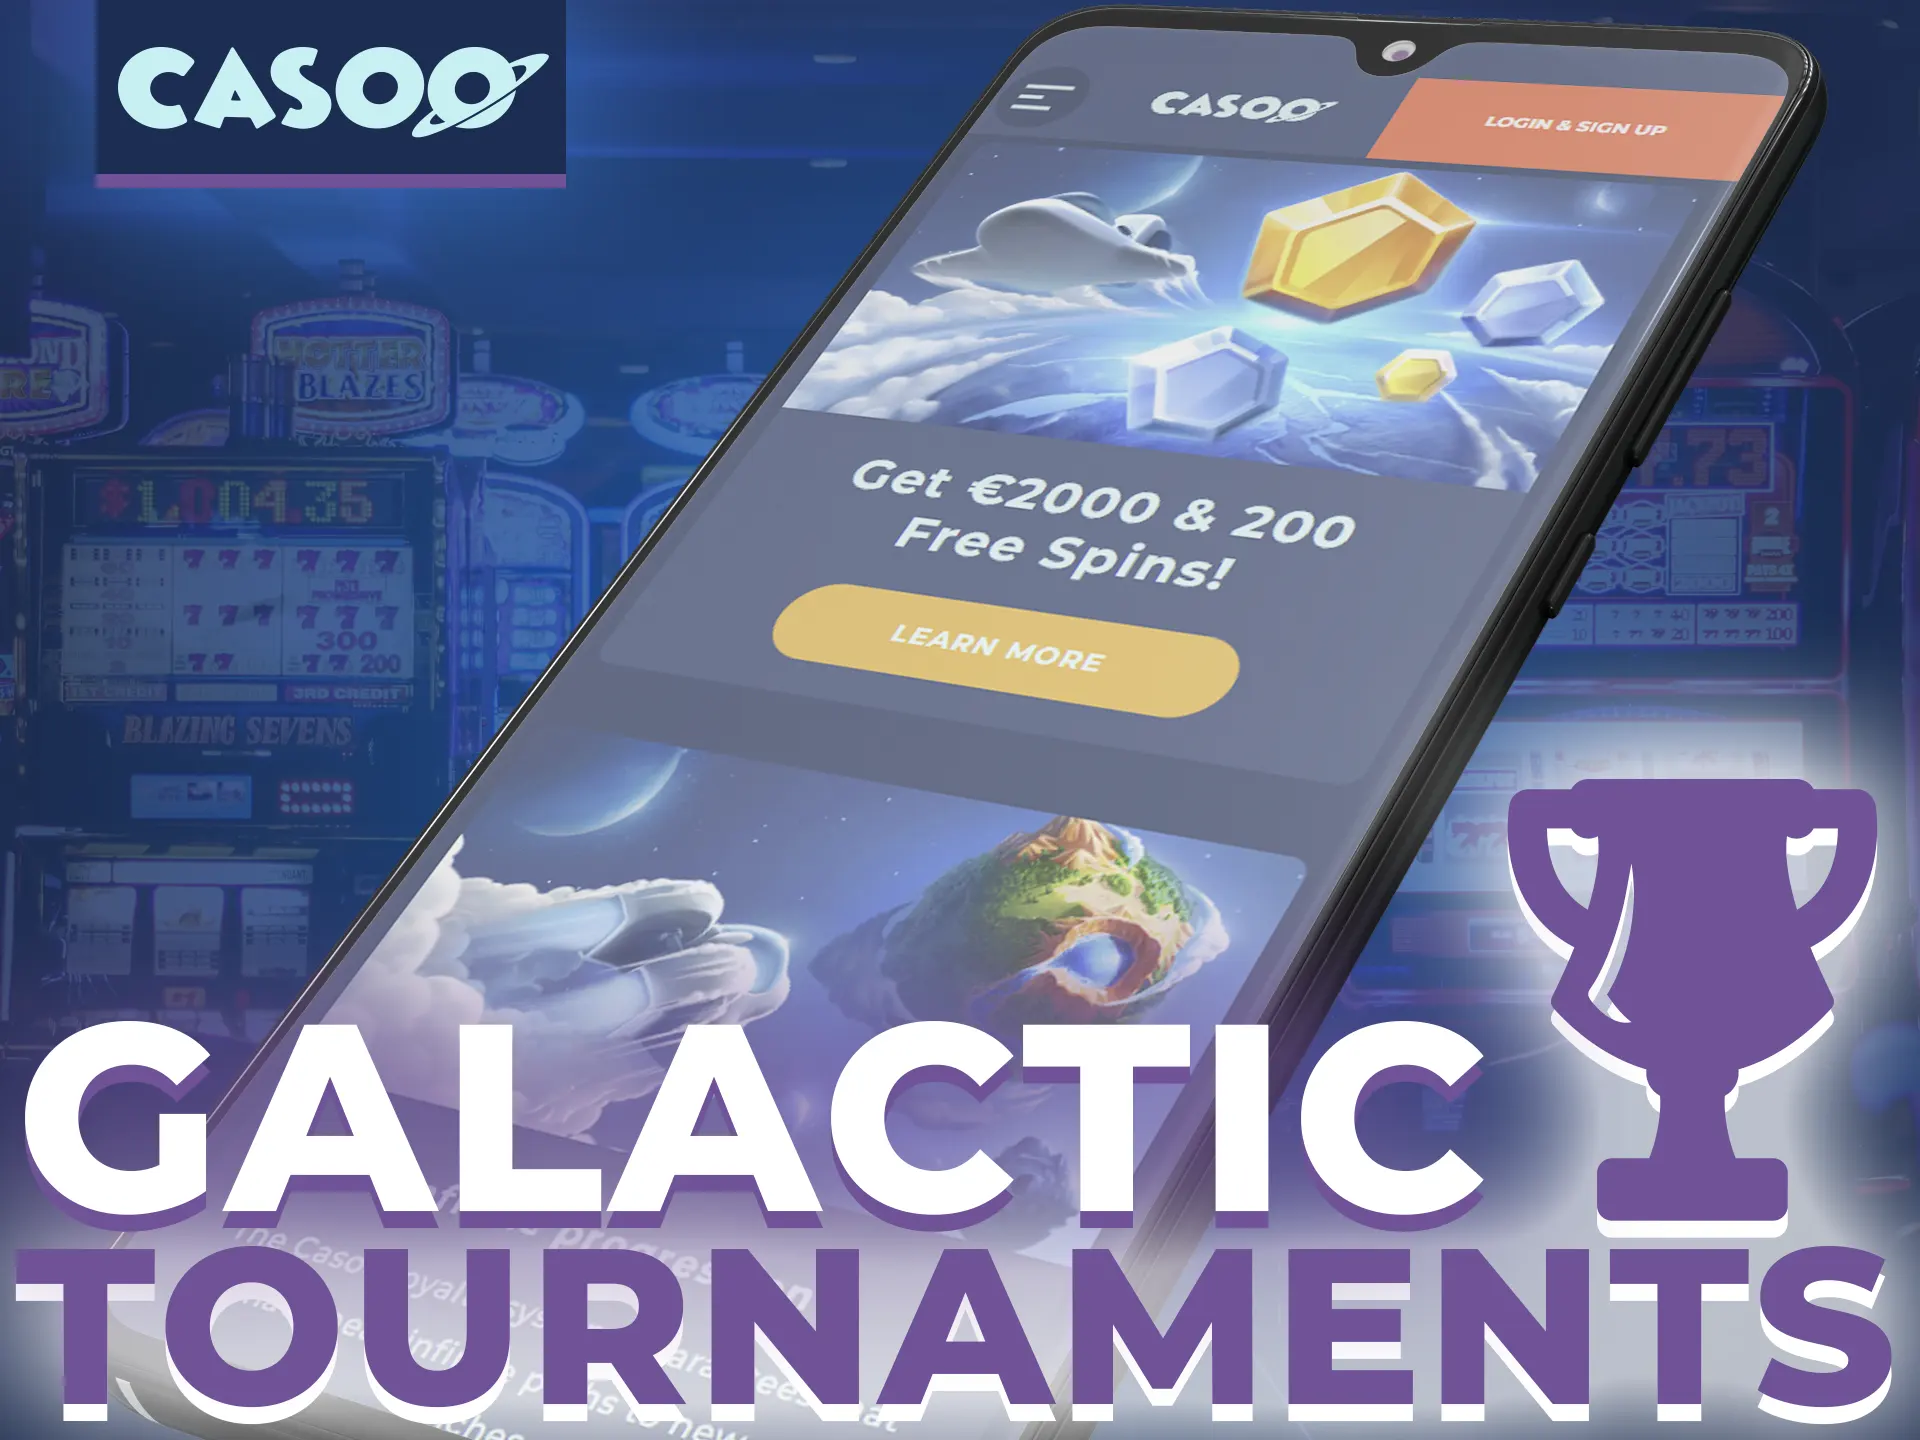 Win free spins and cash with Galactic Tournaments at Casoo.